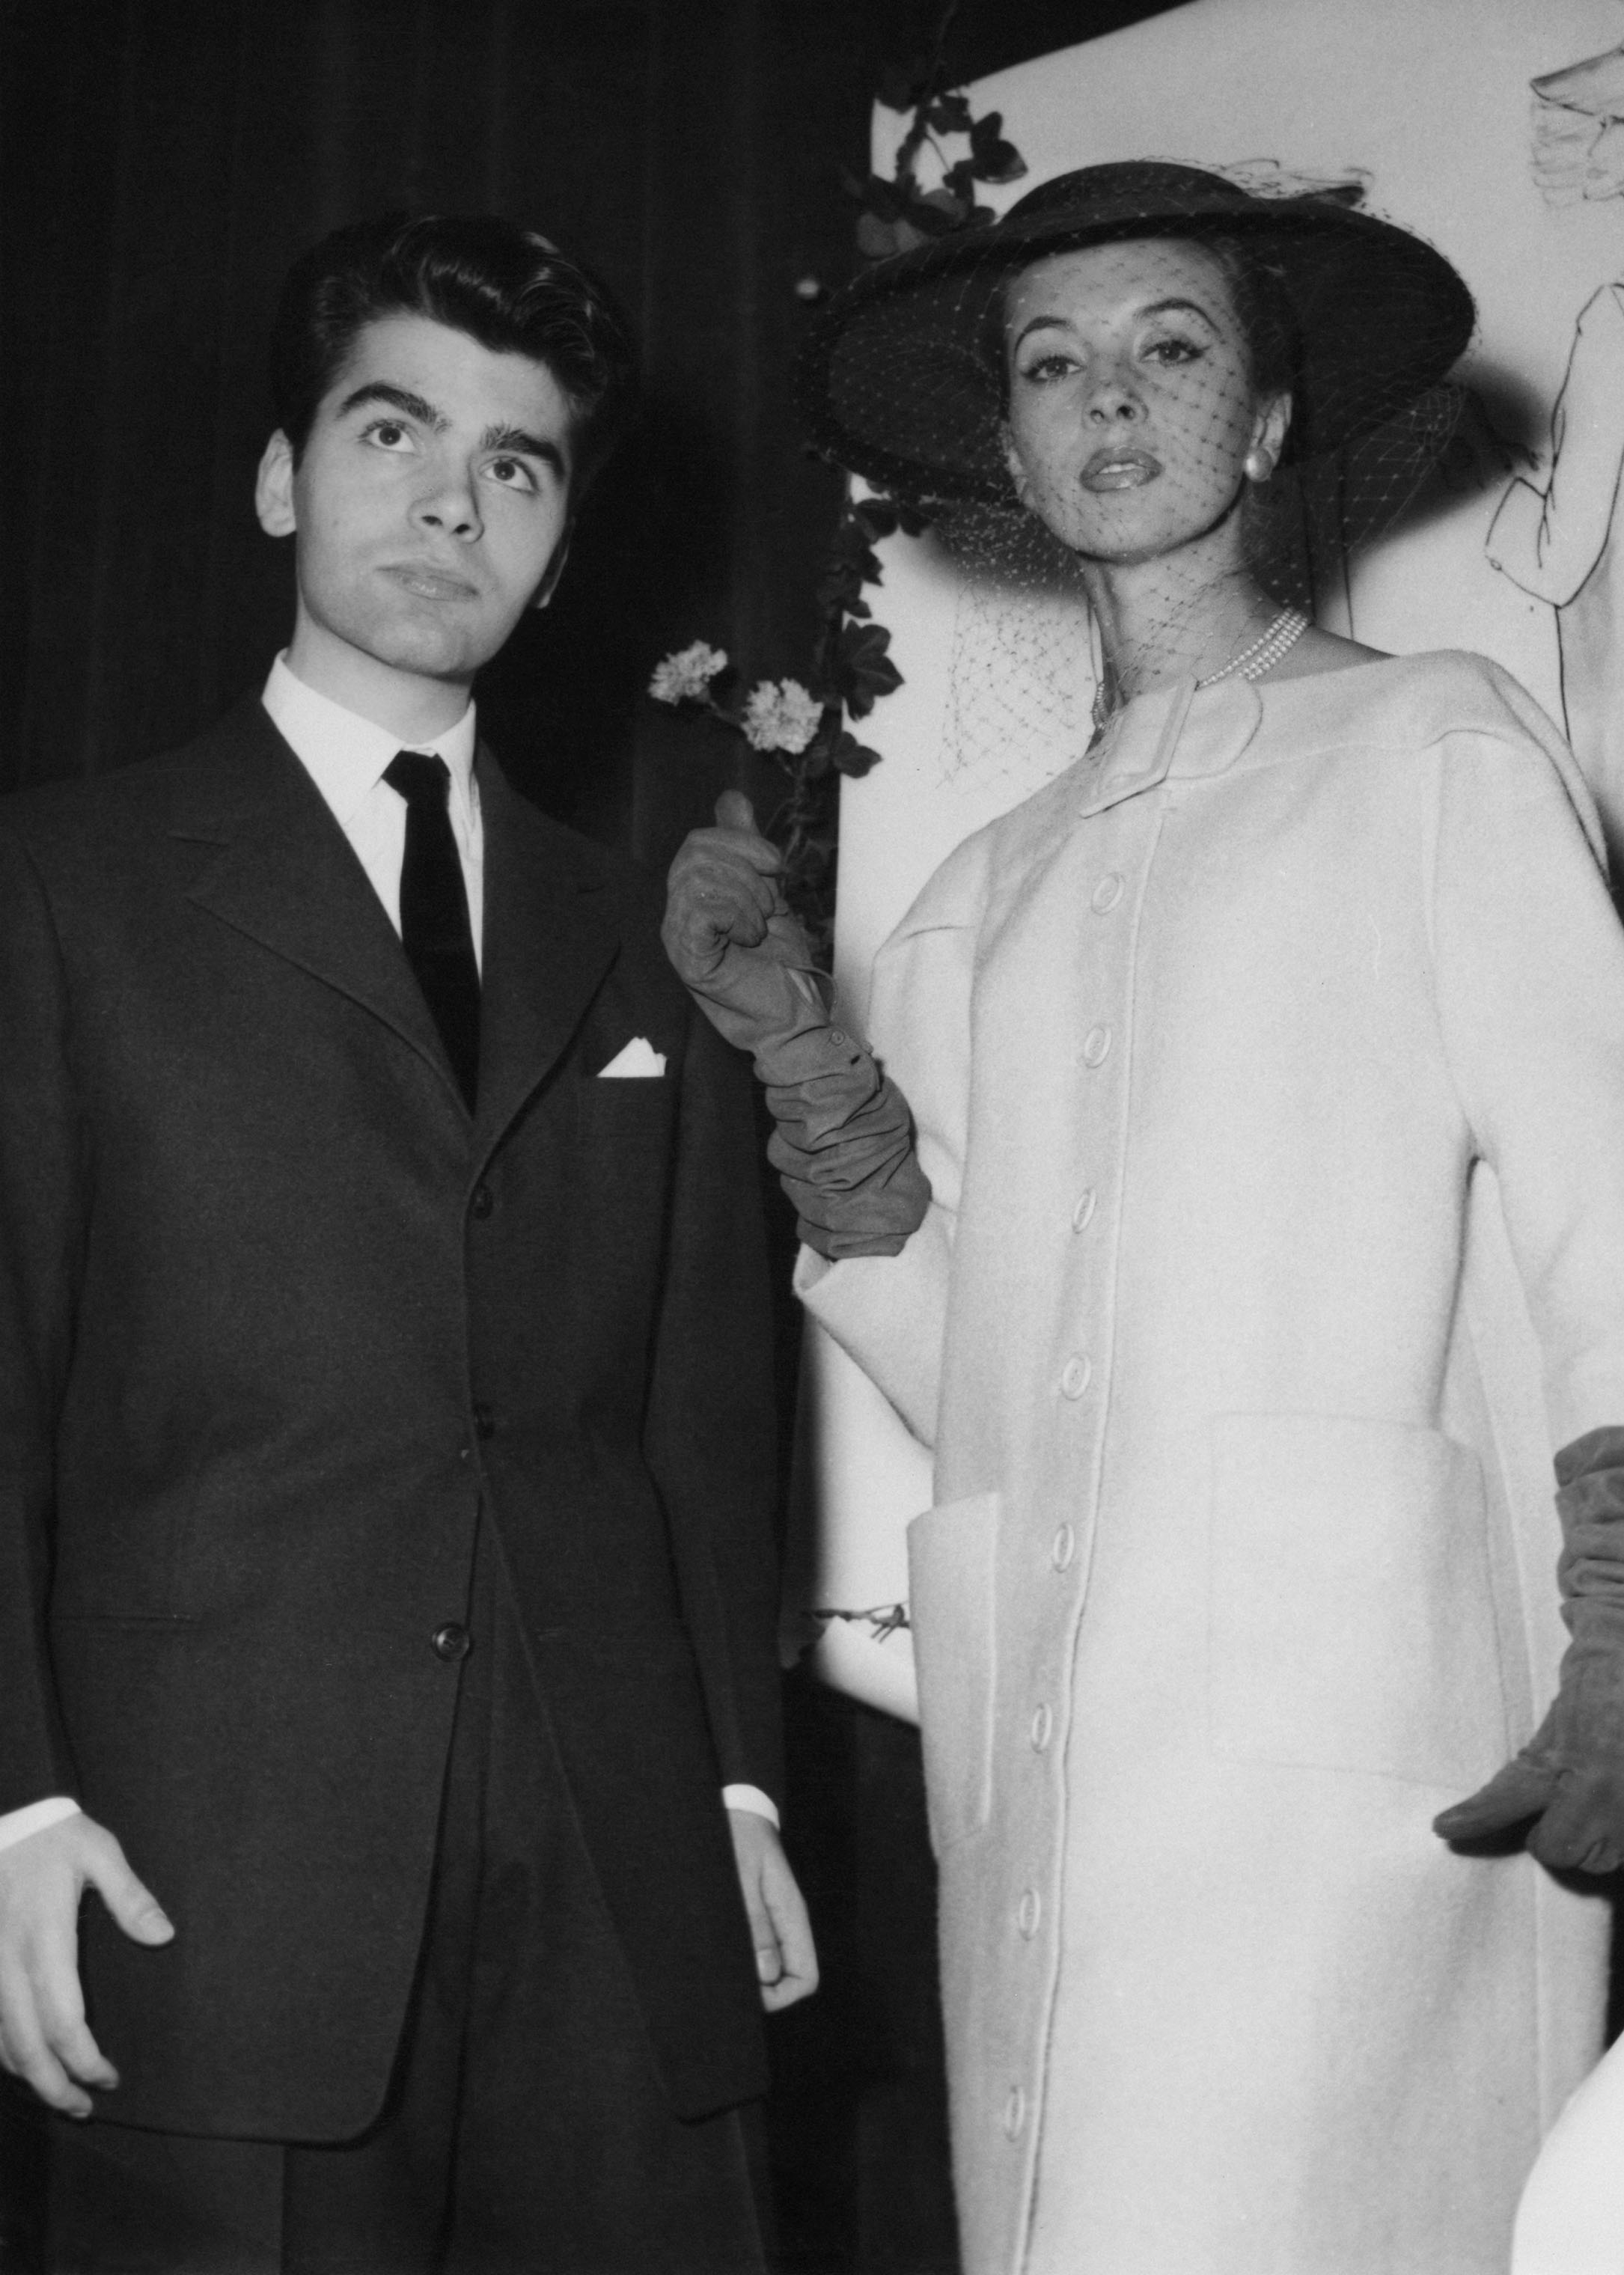 Karl Lagerfeld after winning the coats category in a design competition sponsored by the International Wool Secretariat in Paris on Dec. 14, 1954. With him is a model wearing his design. (Keystone/Hulton Archive/Getty Images)